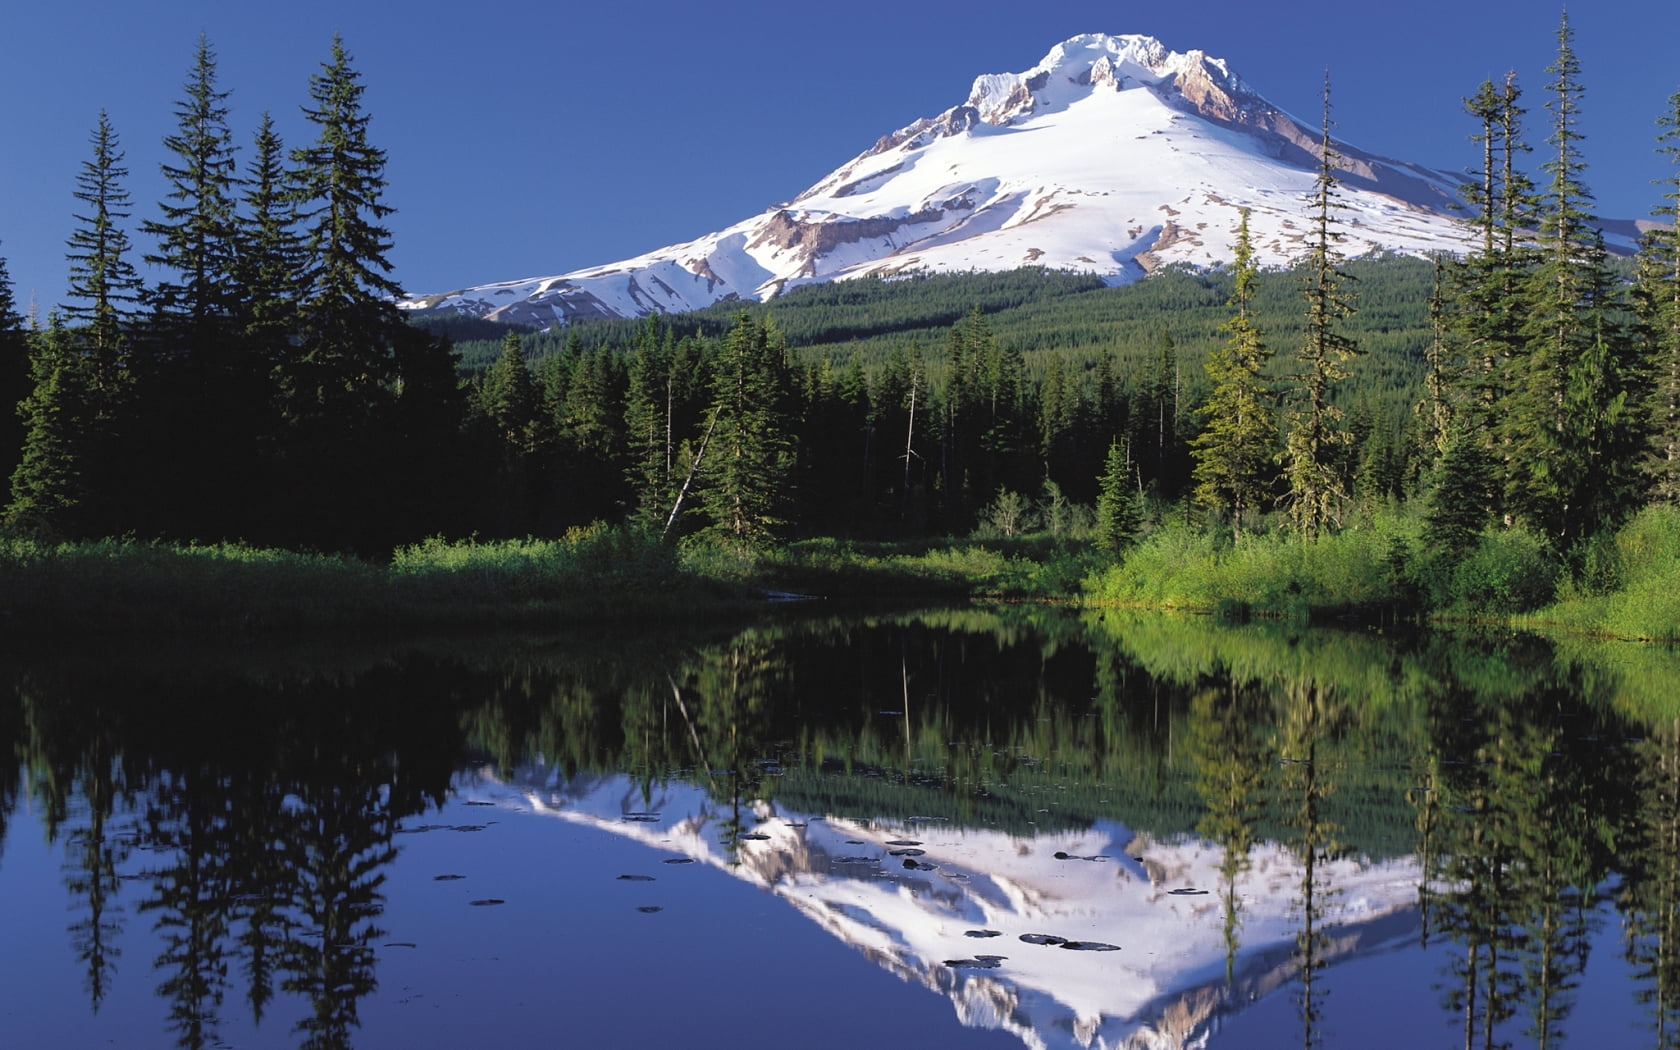 large body of water near snowy mountain under clear sky during daytime, mt hood, oregon